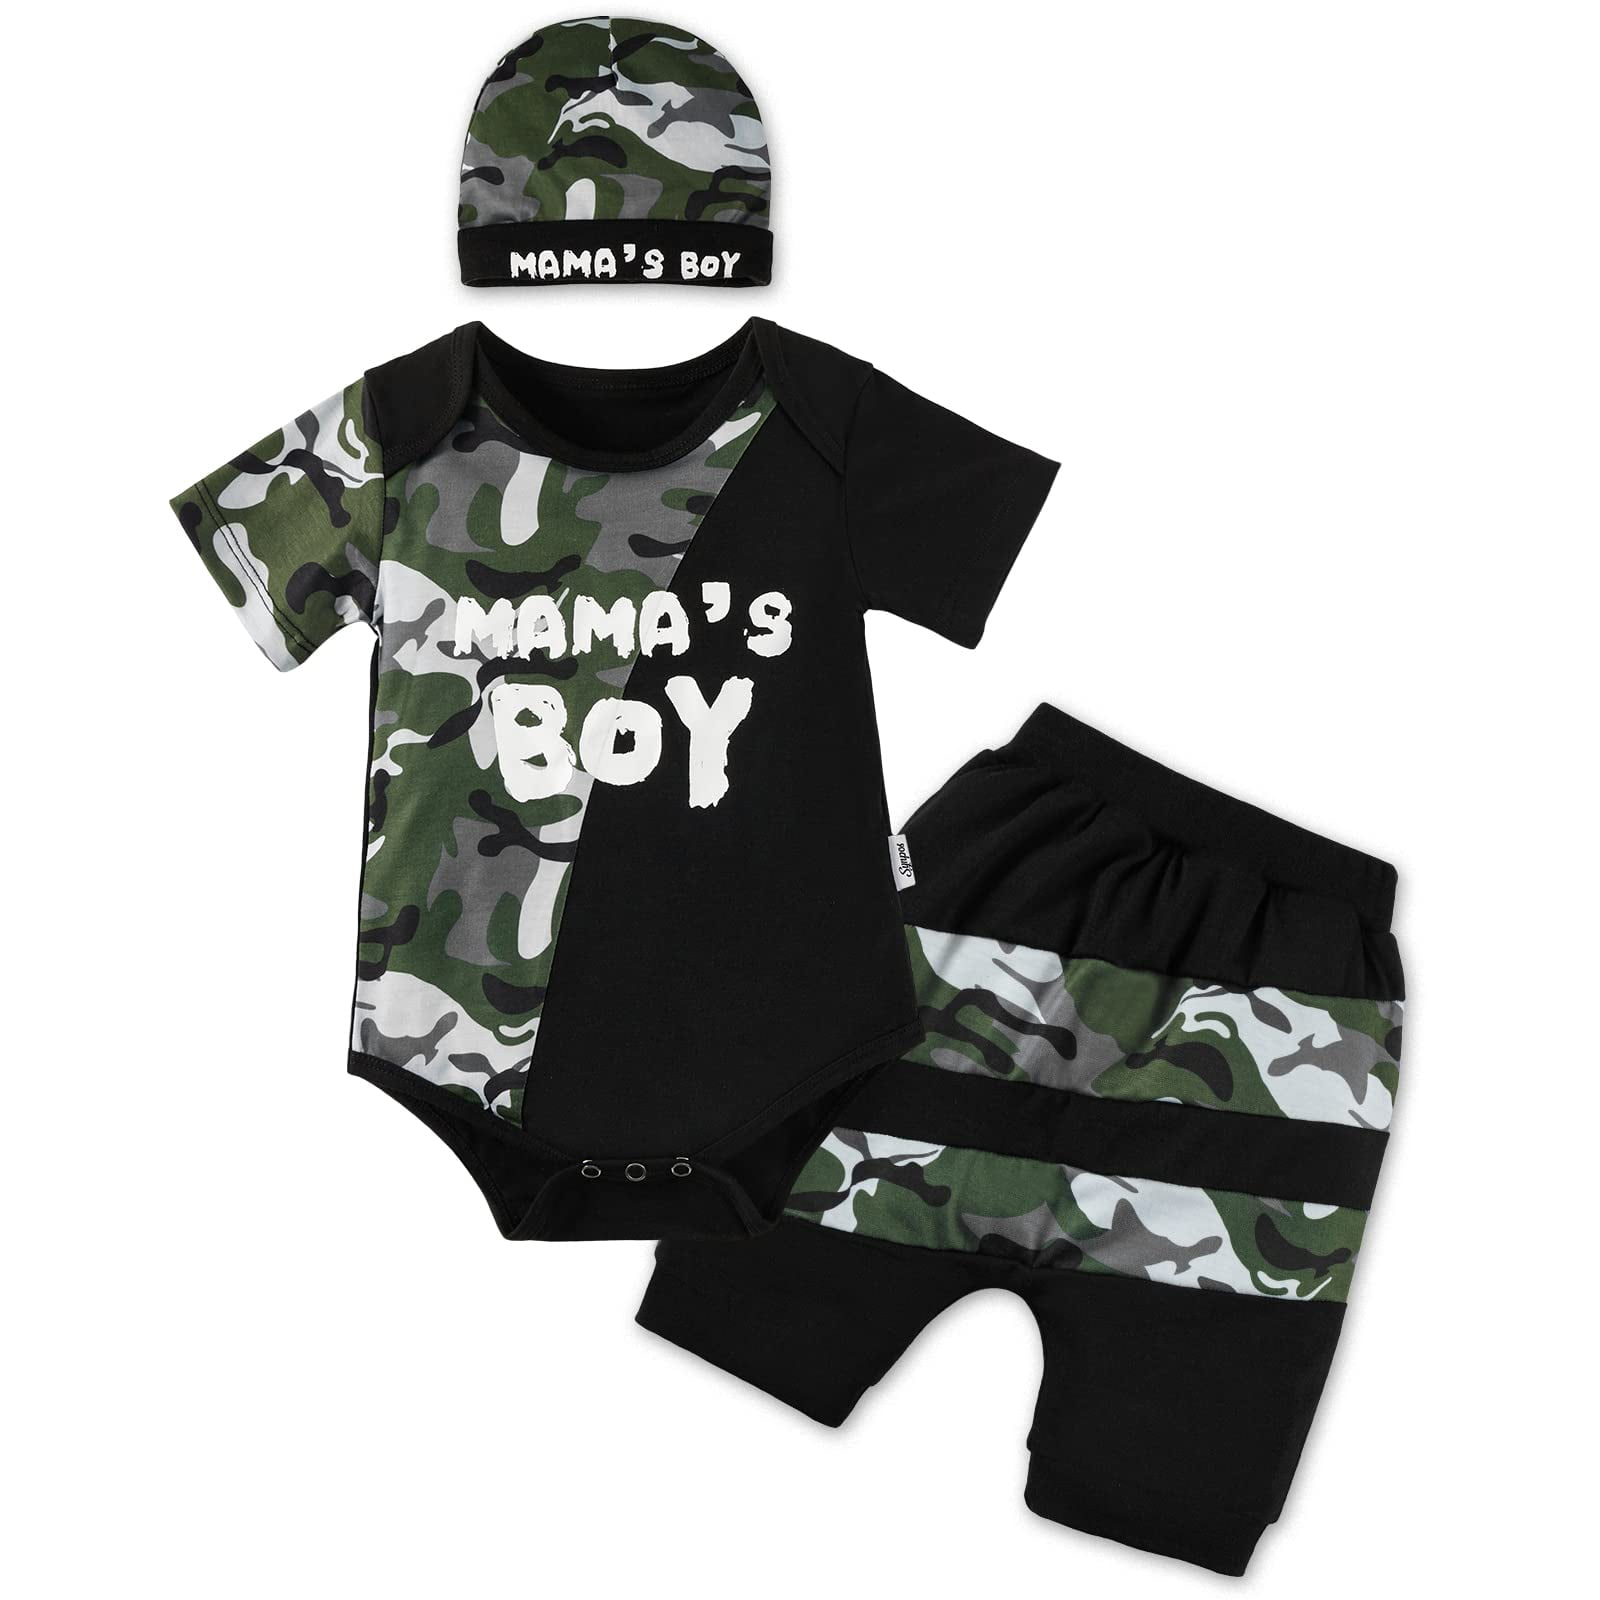 CAMOUFLAGE BABYGROW ARMY MILITARY HUNTING FISHING CAMO BABY VEST 0-12 MONTHS NEW 